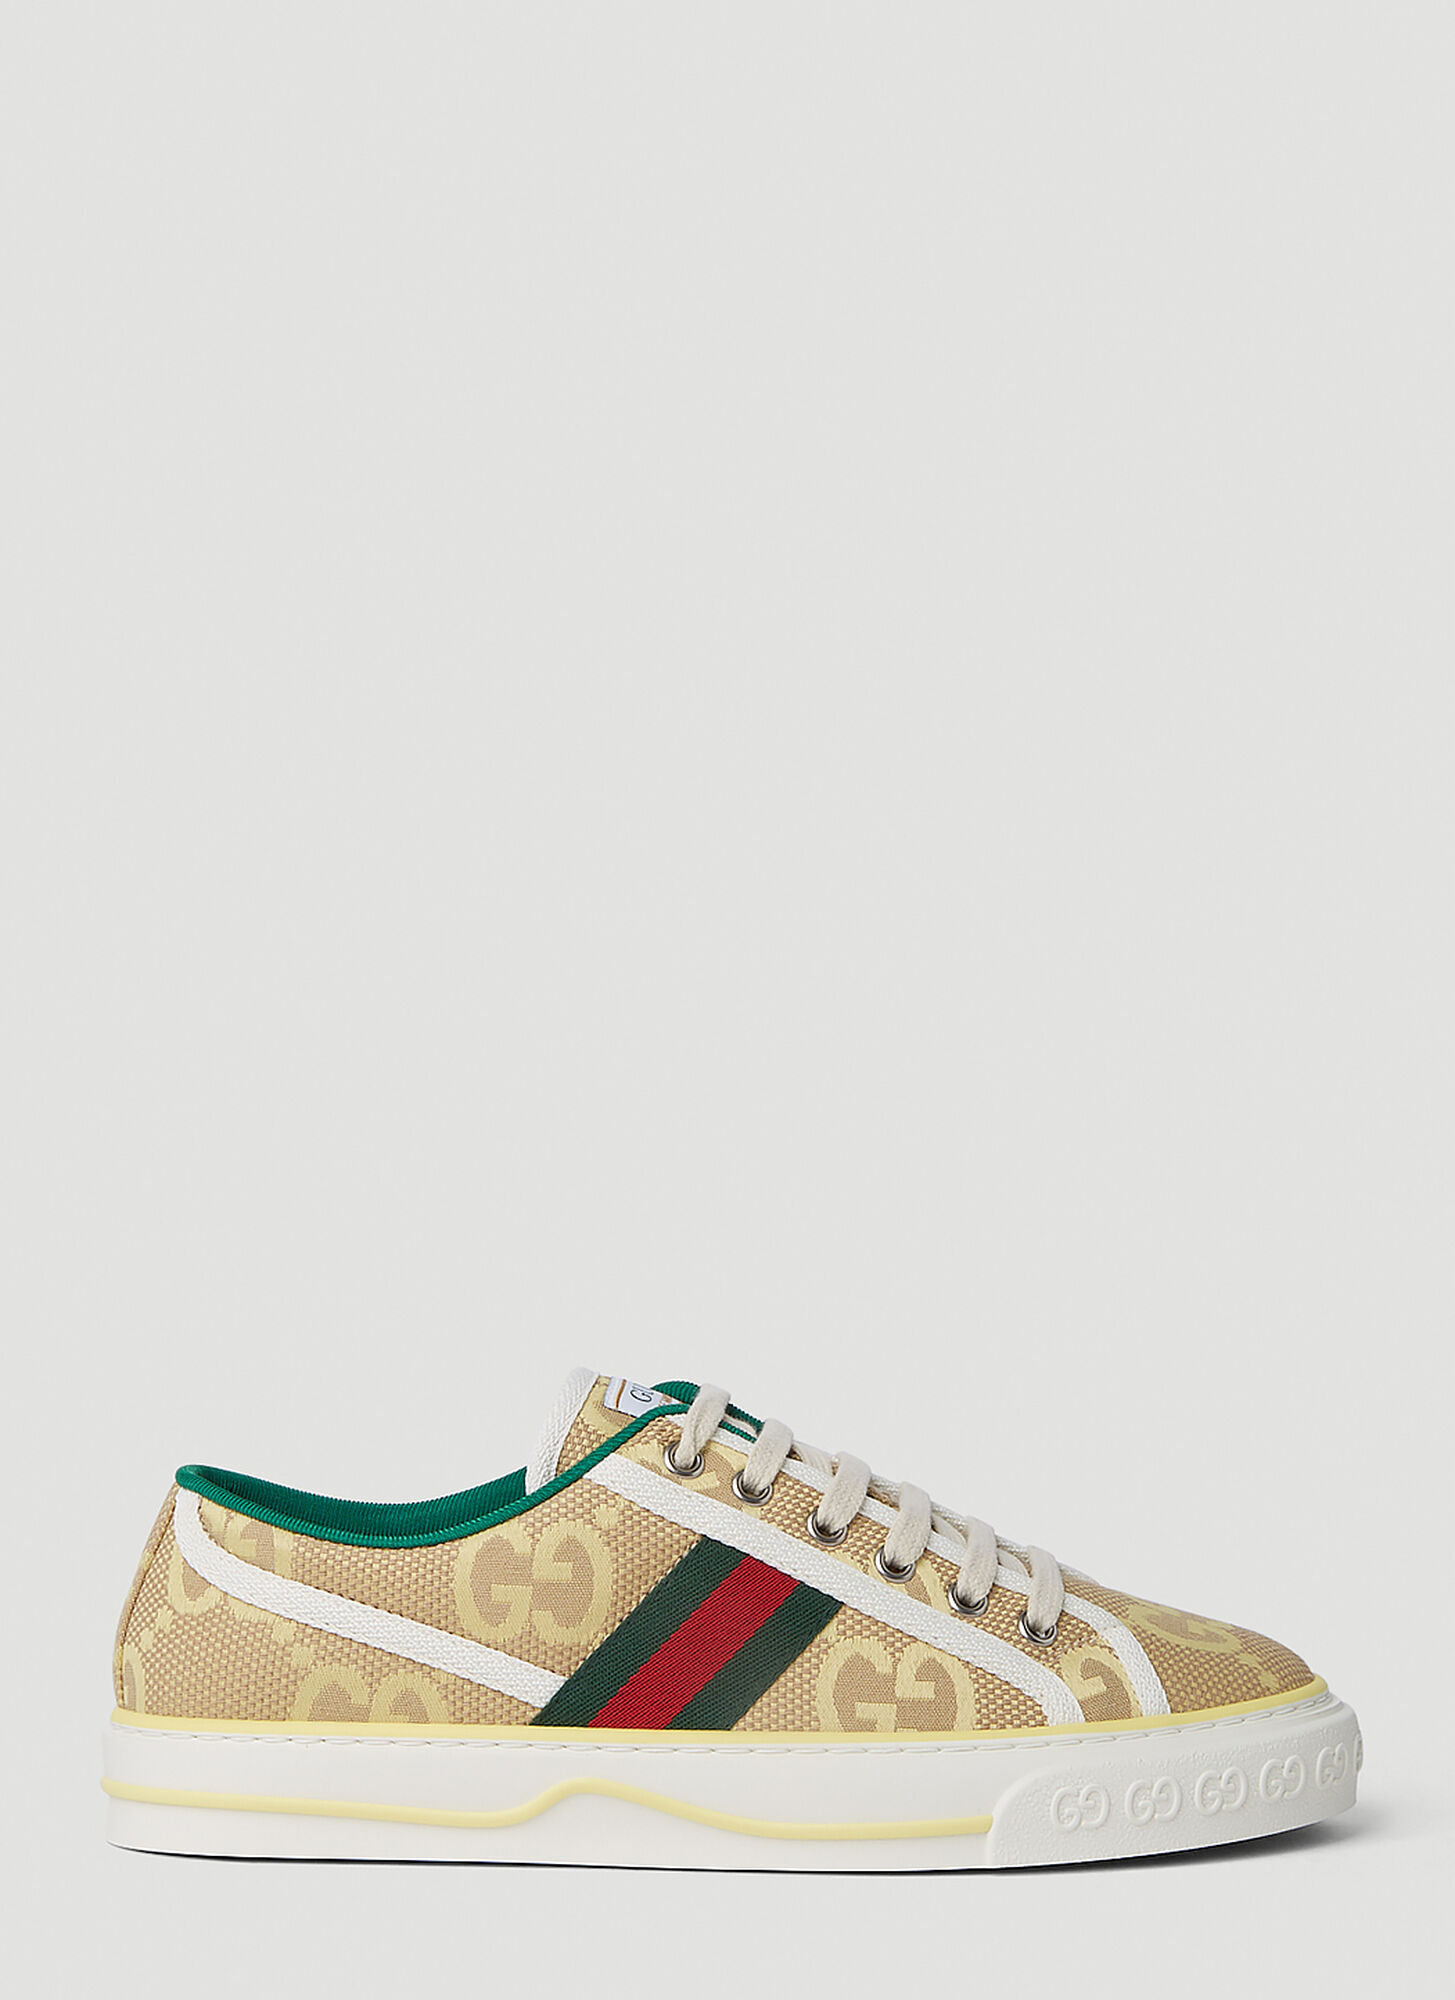 GUCCI 1977 TENNIS SNEAKERS